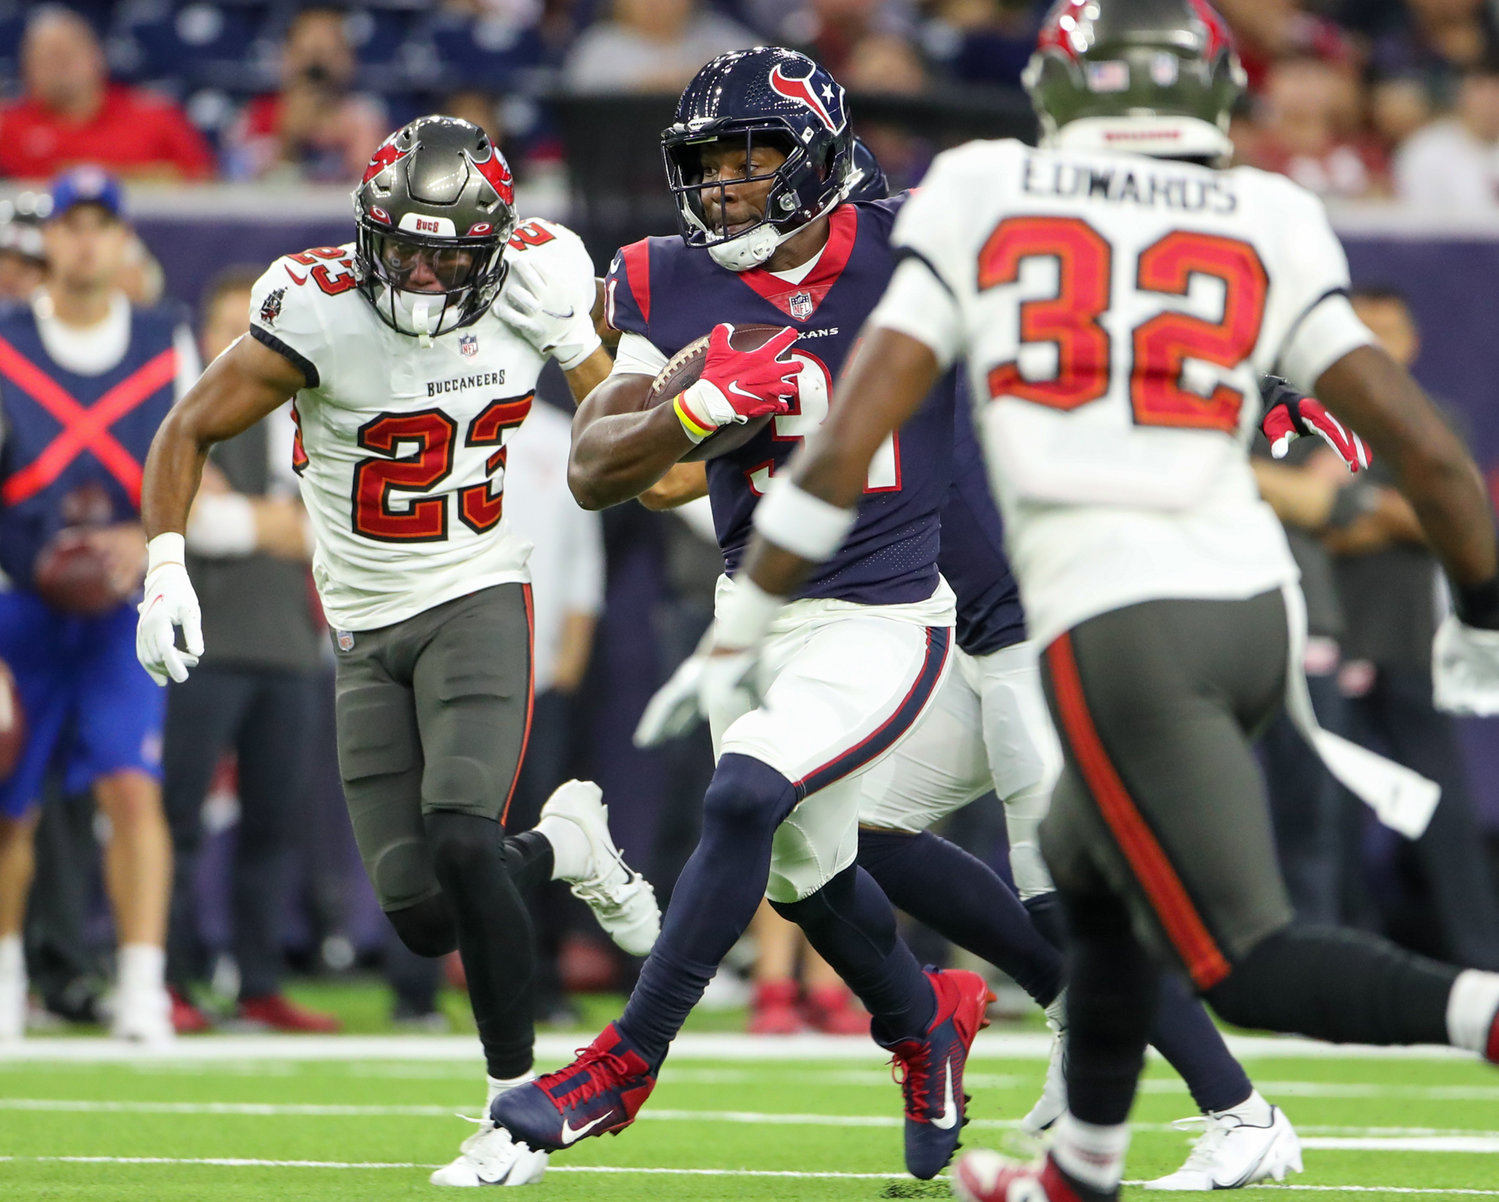 Houston Texans running back David Johnson (31) carries the ball during an NFL preseason game between the Houston Texans and the Tampa Bay Buccaneers on August 28, 2021 in Houston, Texas.